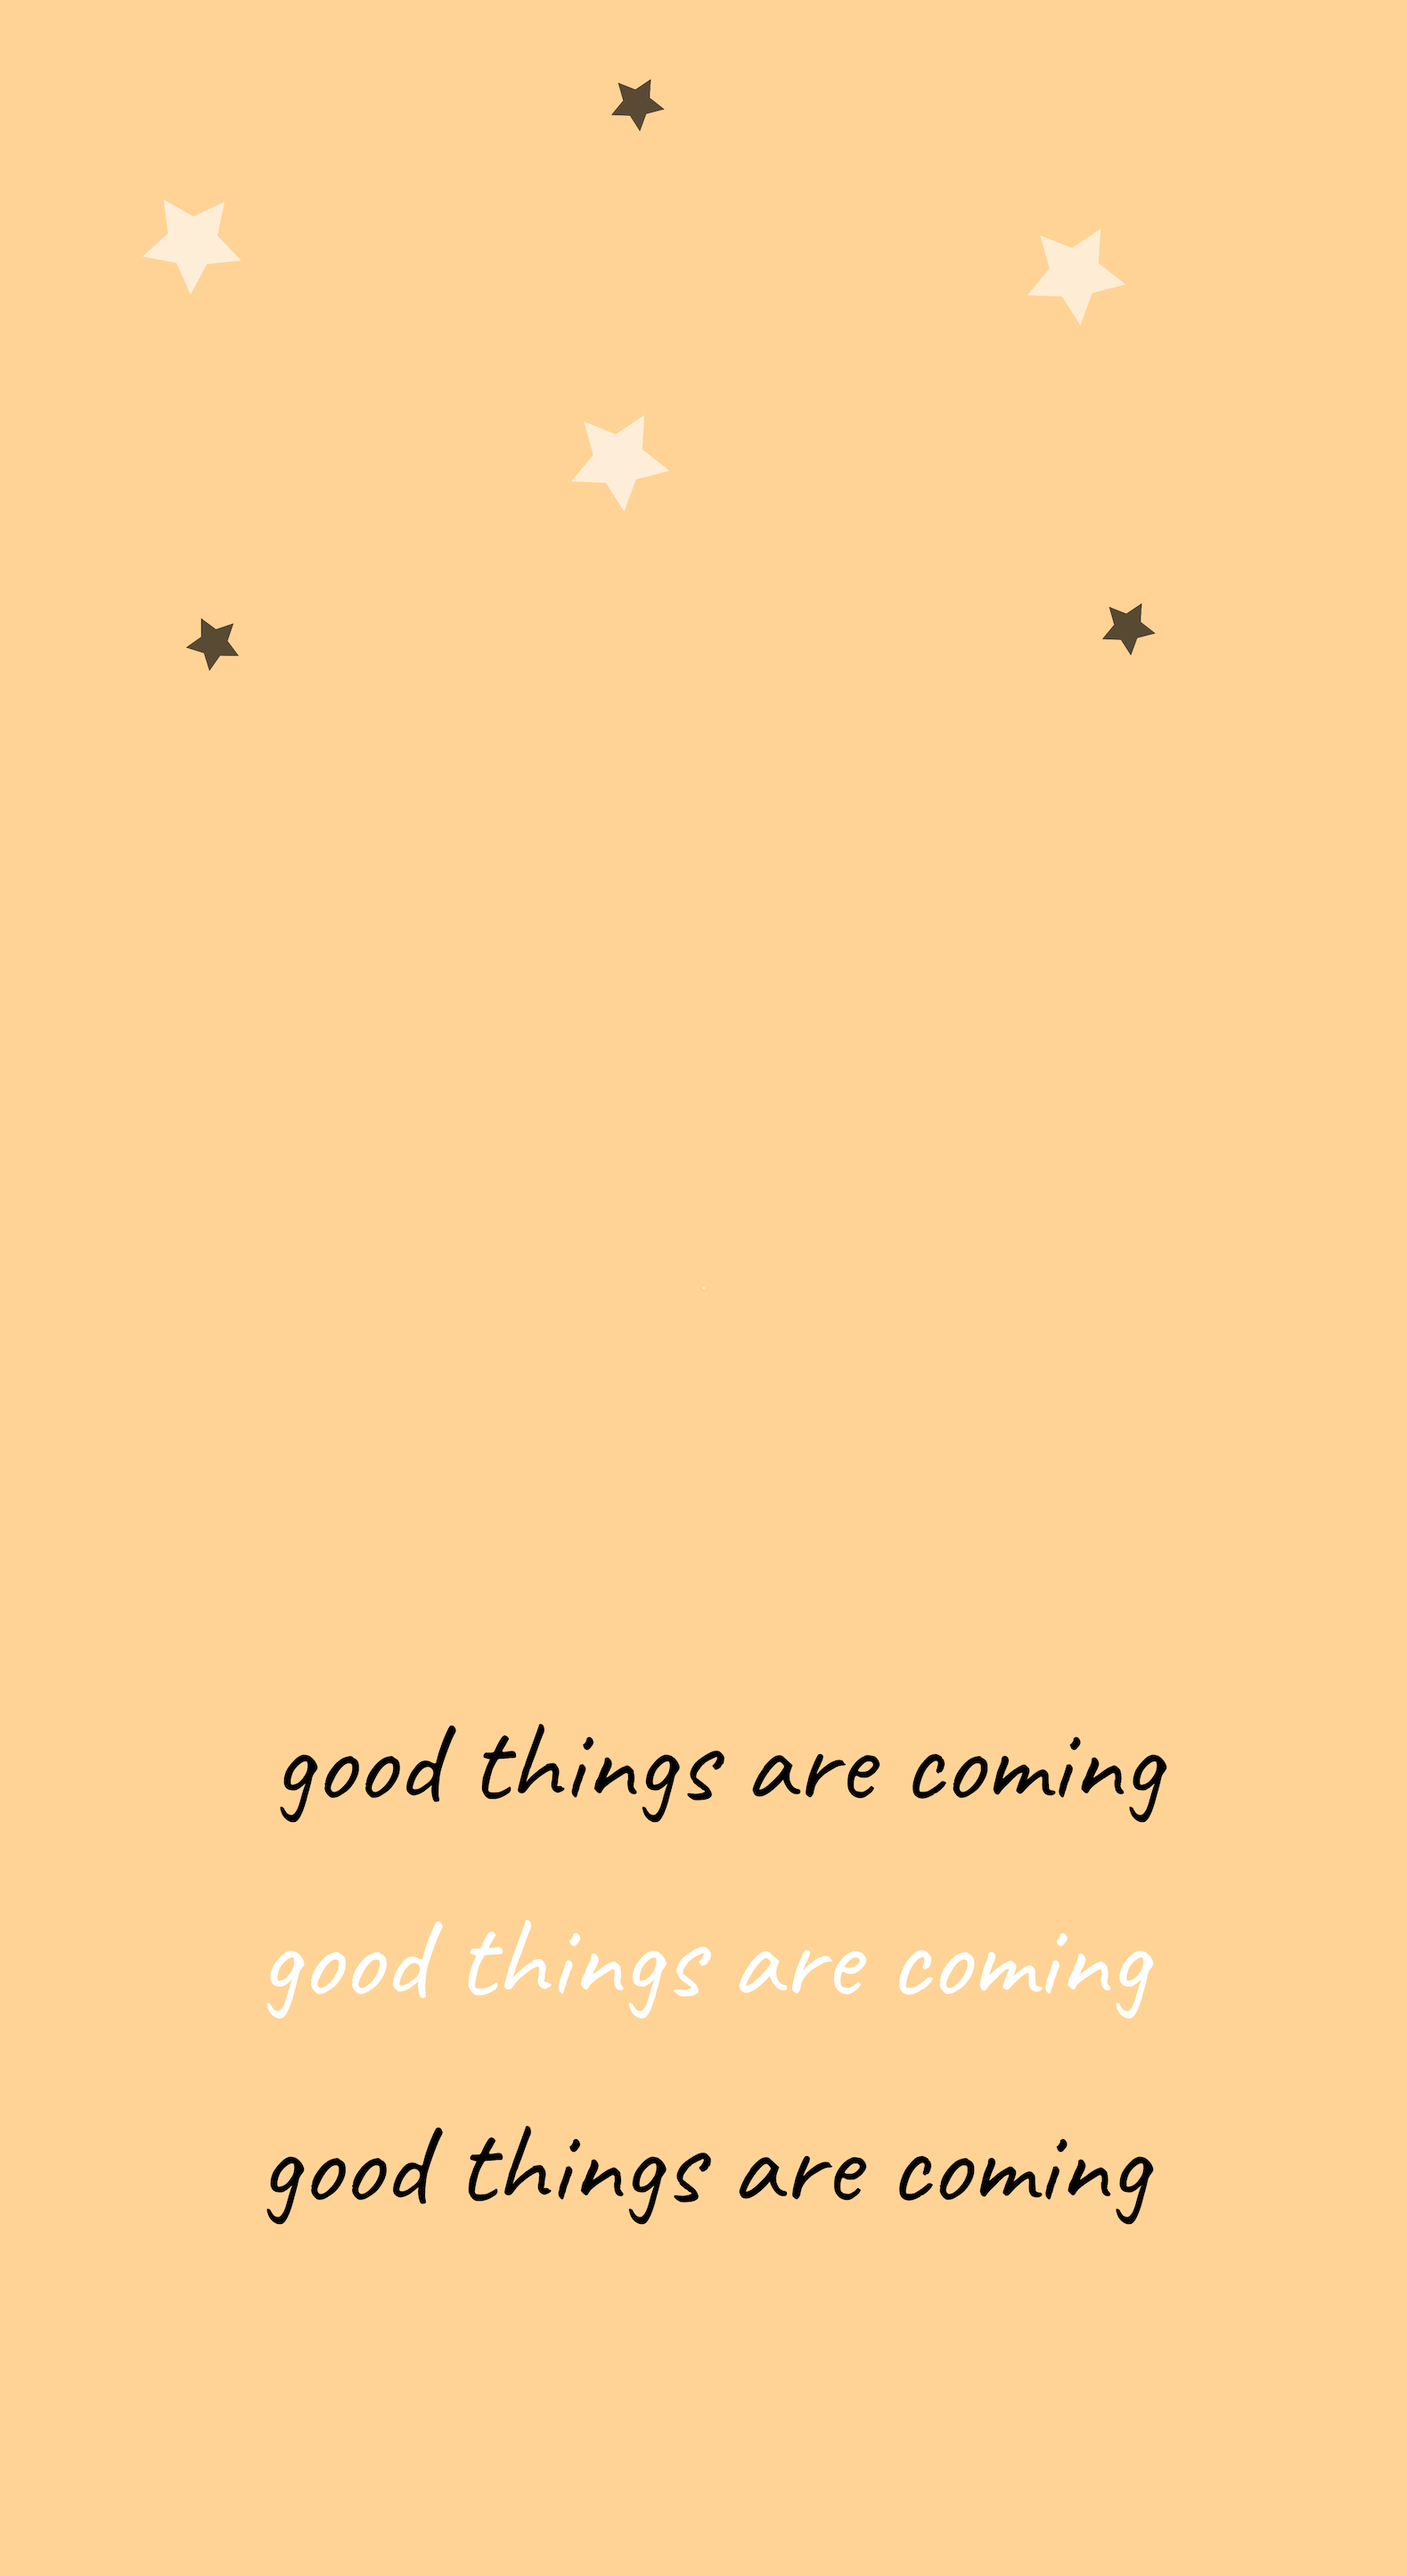 Good things are coming iPhone wallpaper. iPhone wallpaper, Wallpaper iphone cute, Disney phone wallpaper